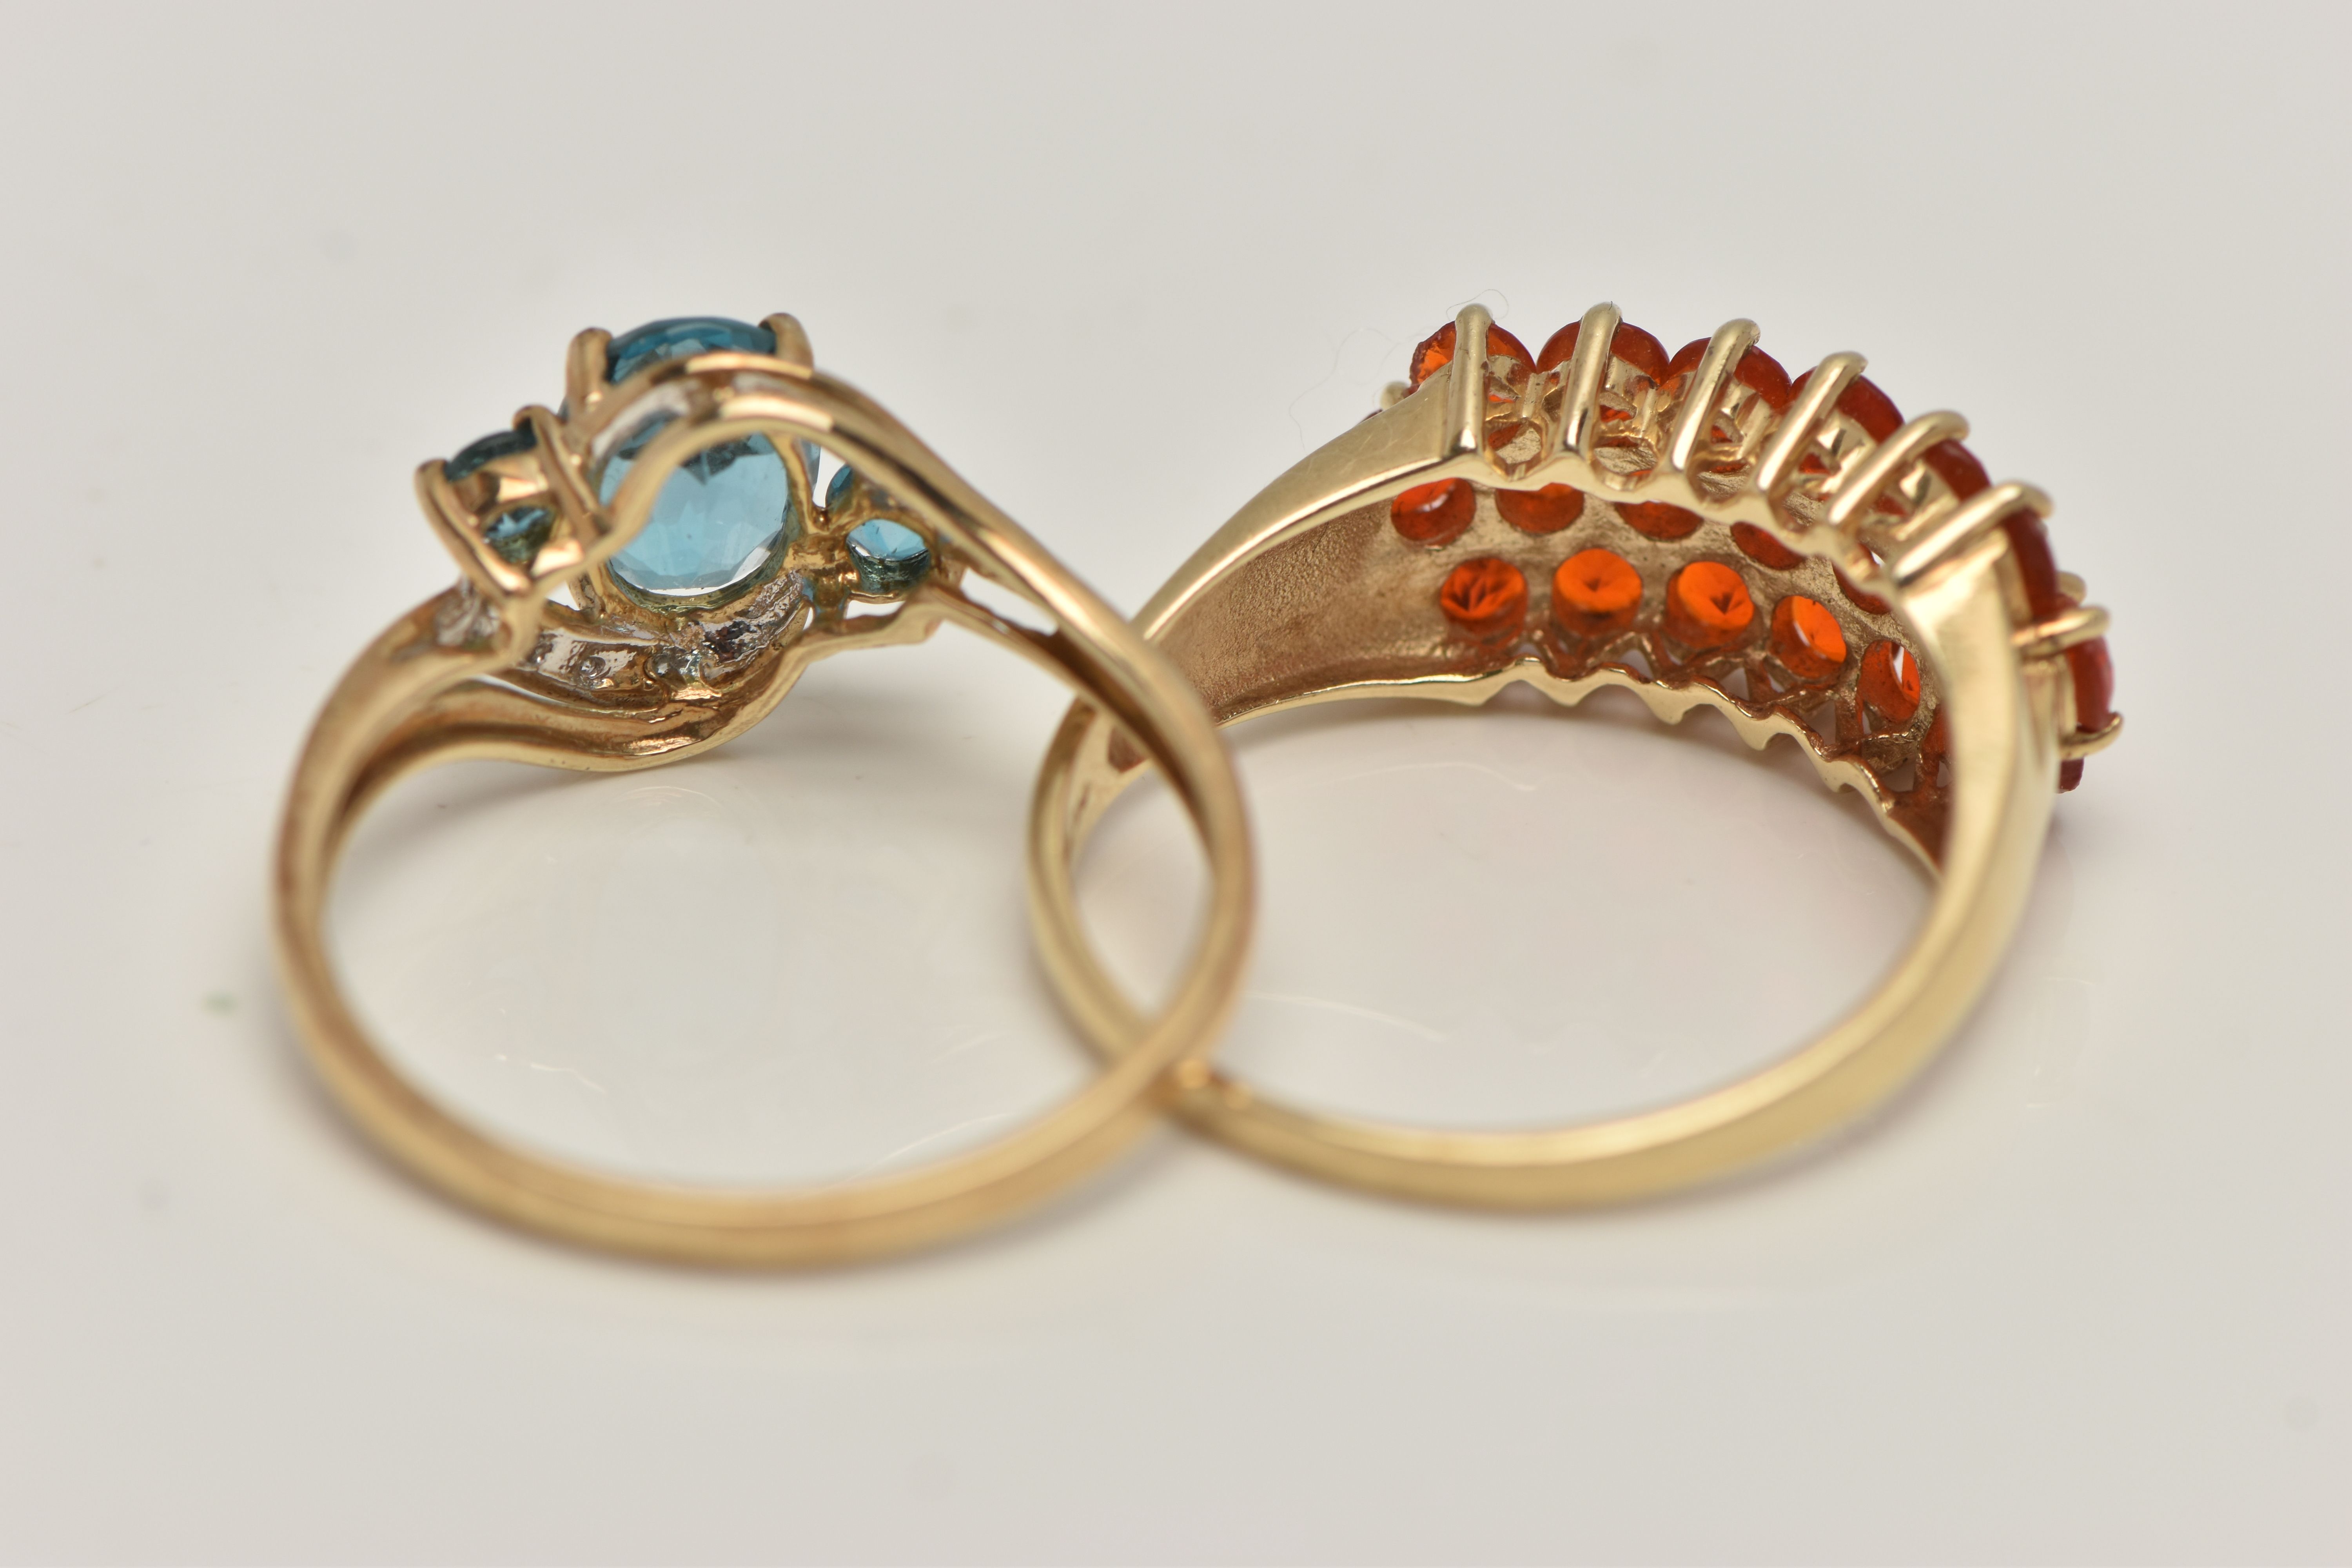 TWO 9CT GOLD GEM SET RINGS, the first a blue topaz and diamond crossover ring, hallmarked 9ct - Image 4 of 4